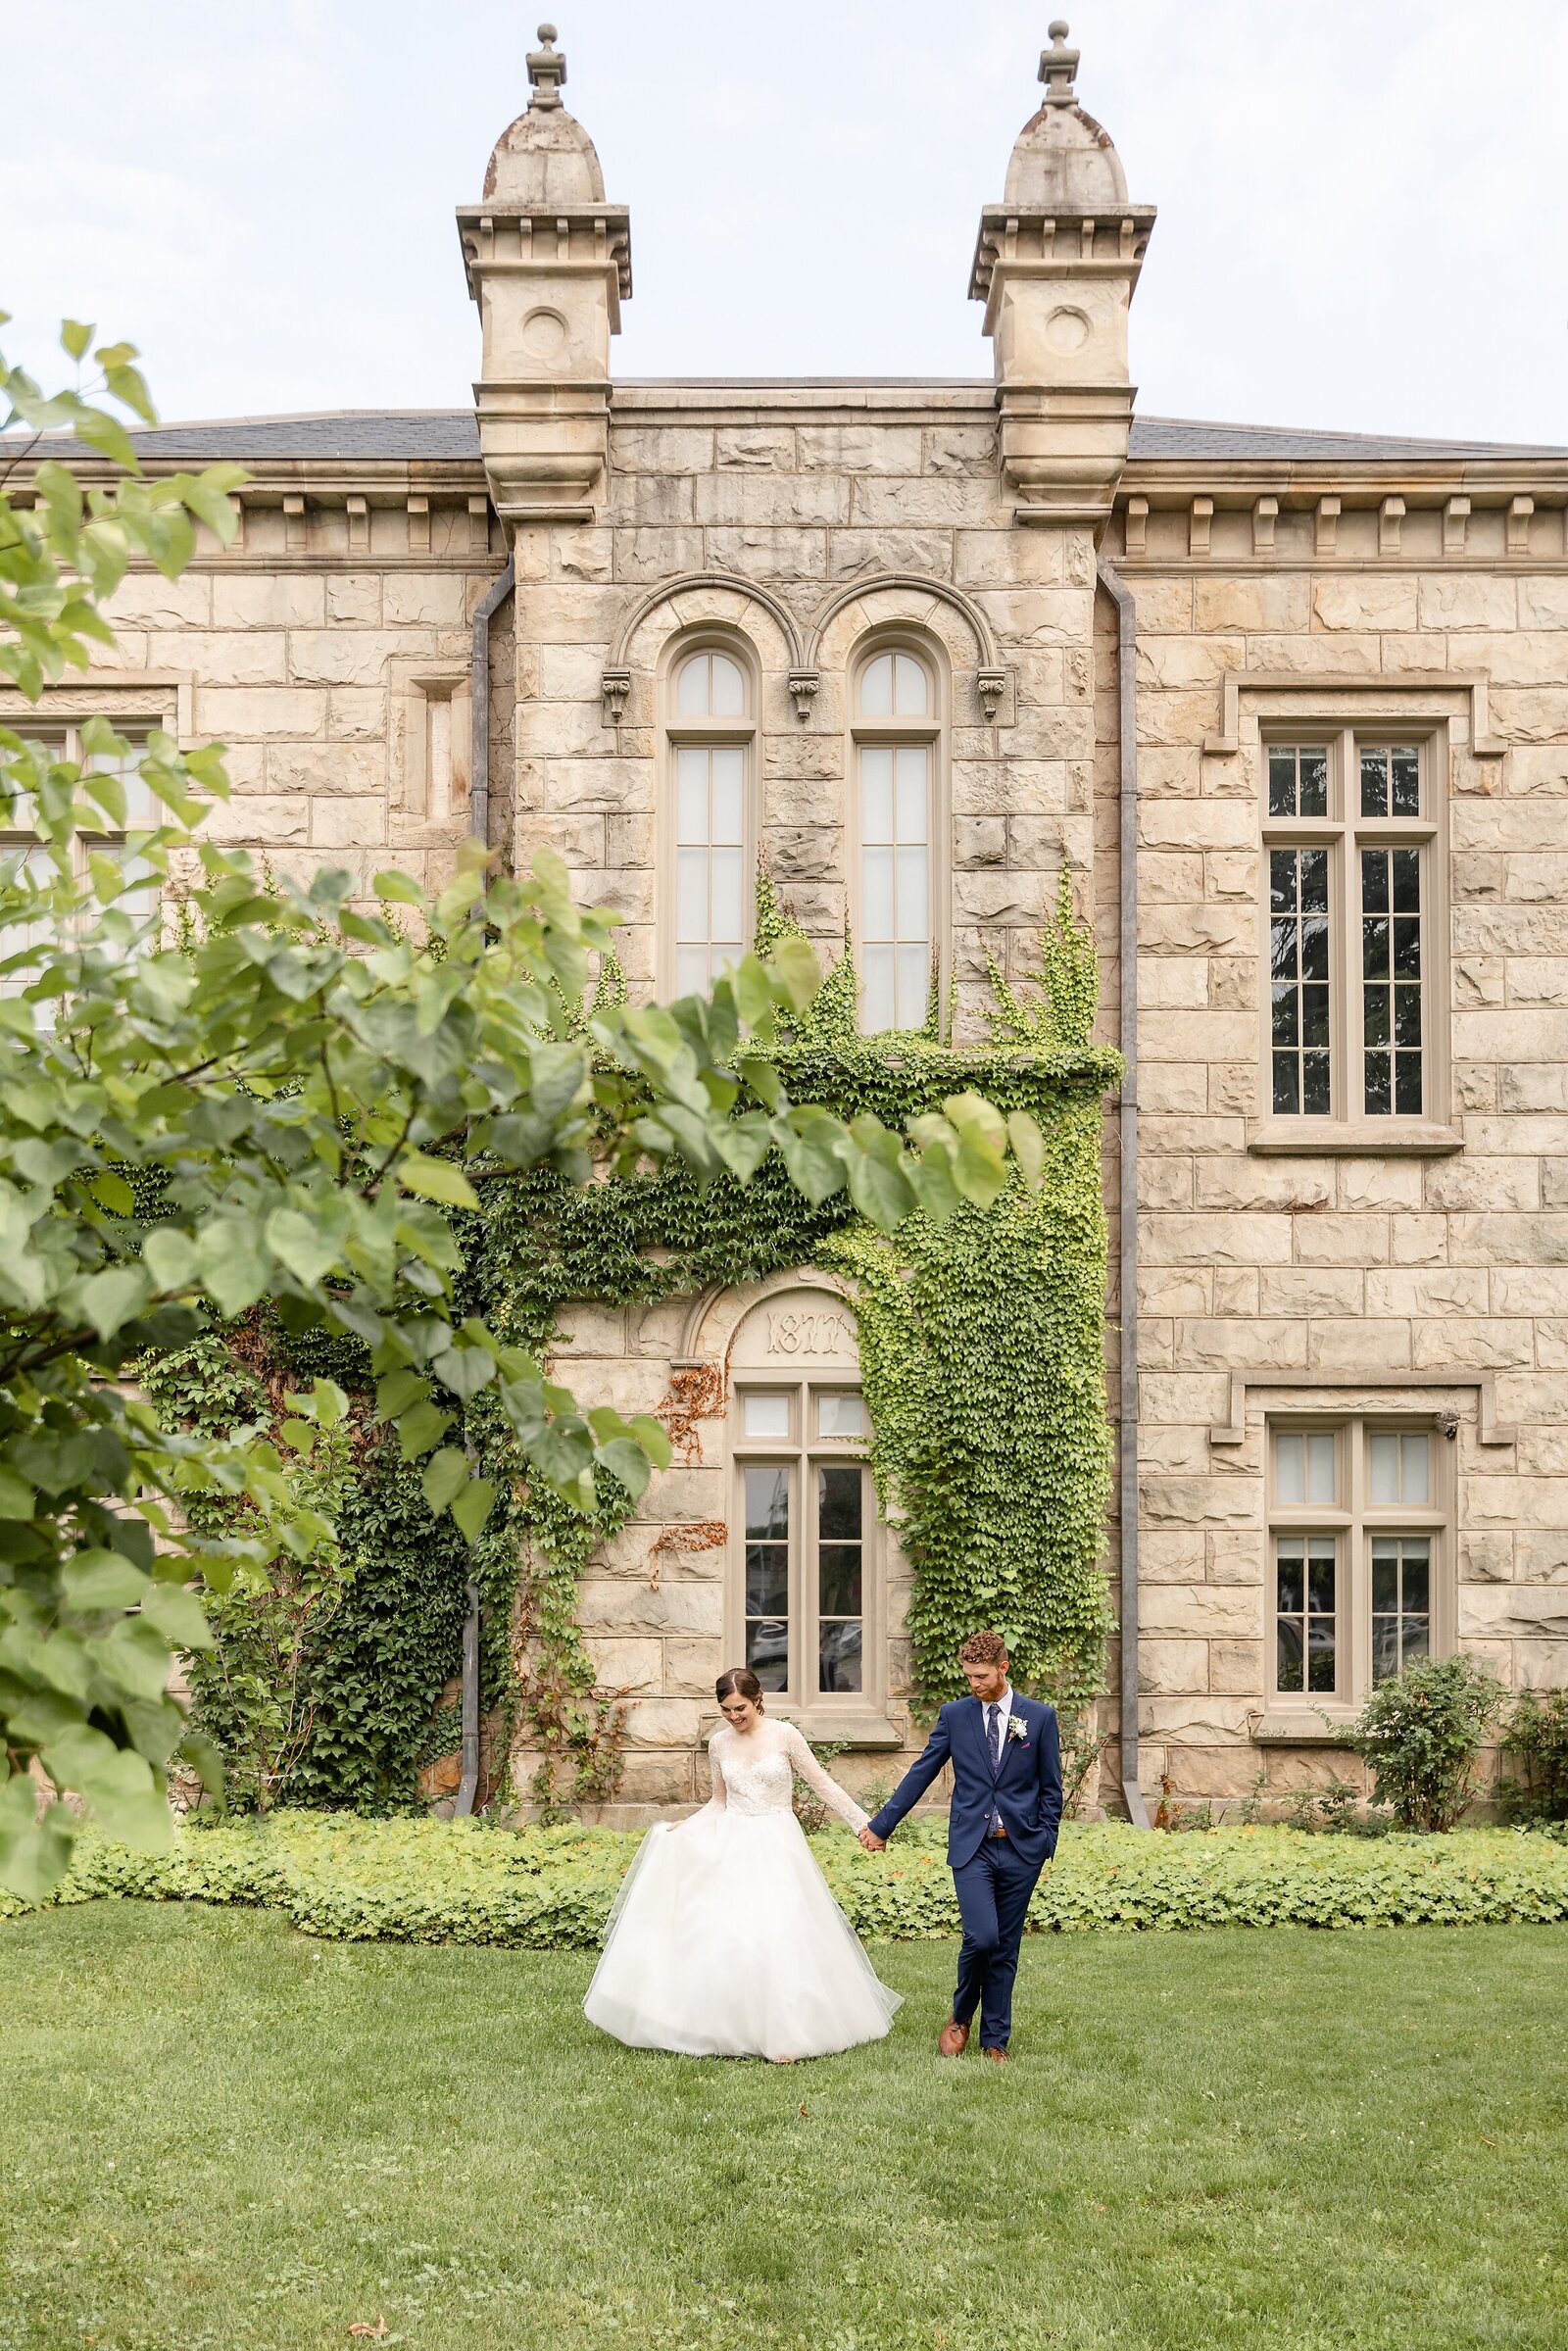 Woodstock-City-Hall-Elopement-Bride-and-Groom-Hold-hands-walking-away-from-castle-like-city-hall